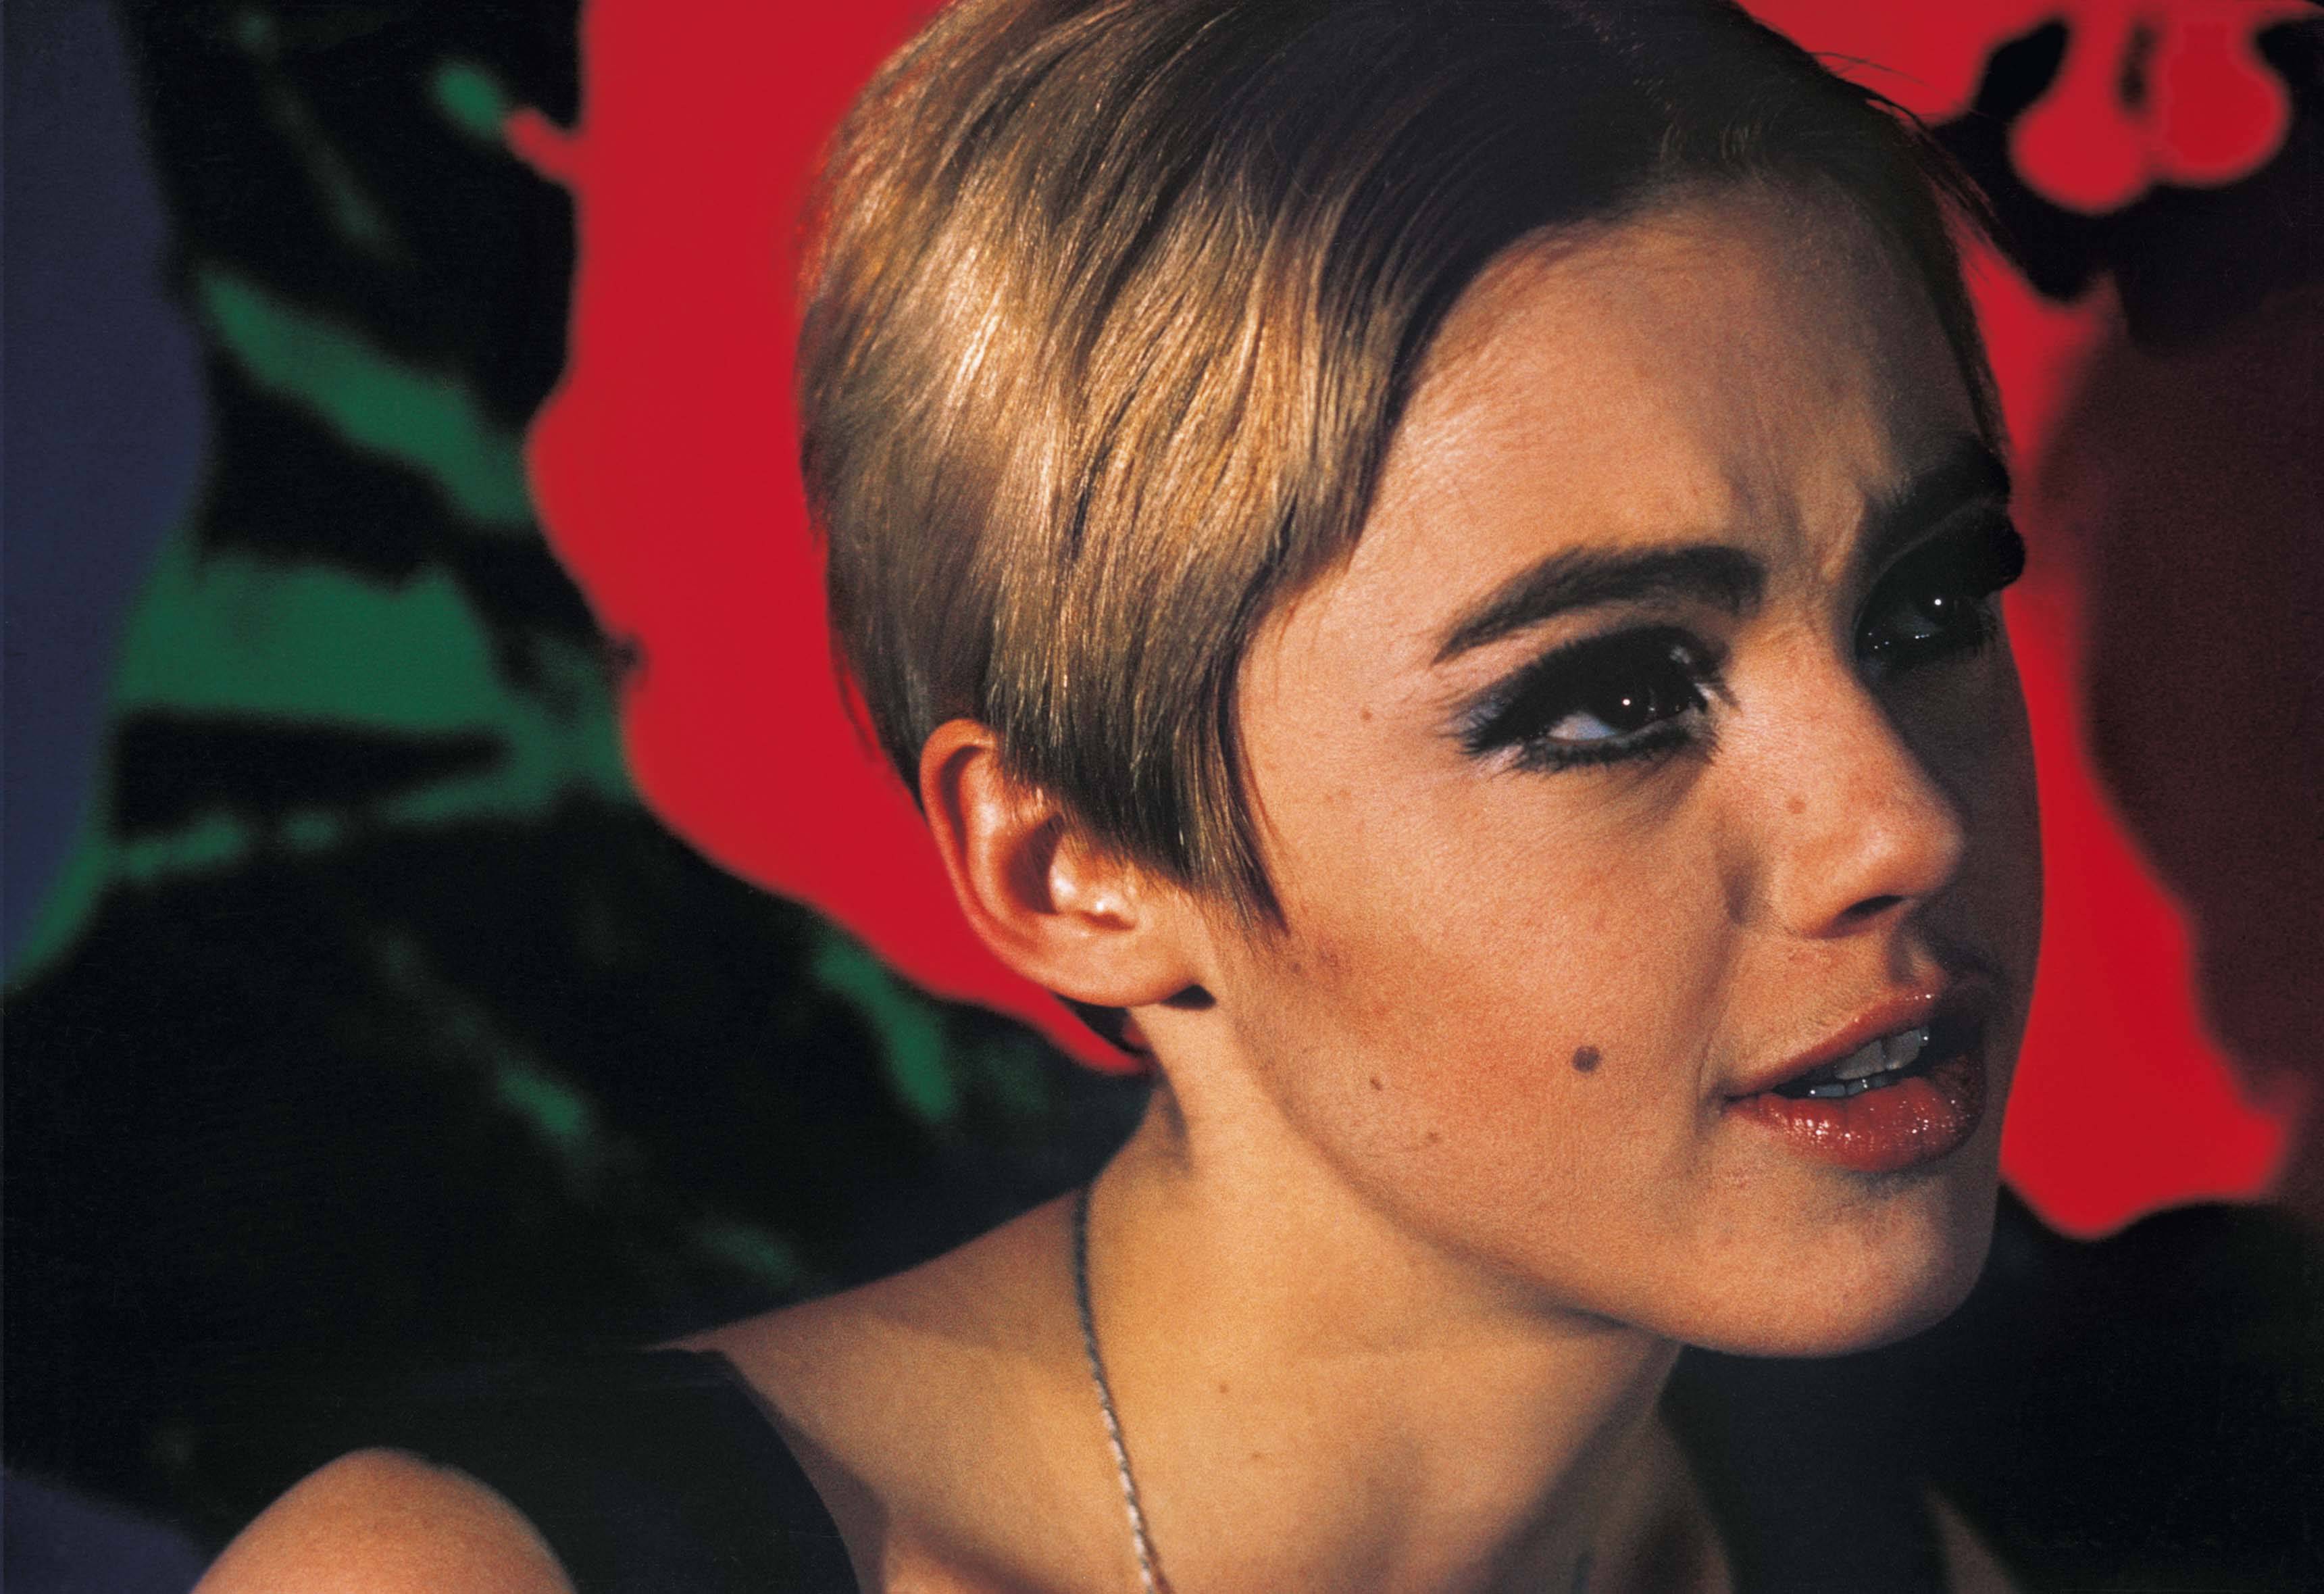 Nat Finkelstein, Edie Sedgwick and red flowers, 1966. Photographie couleur.